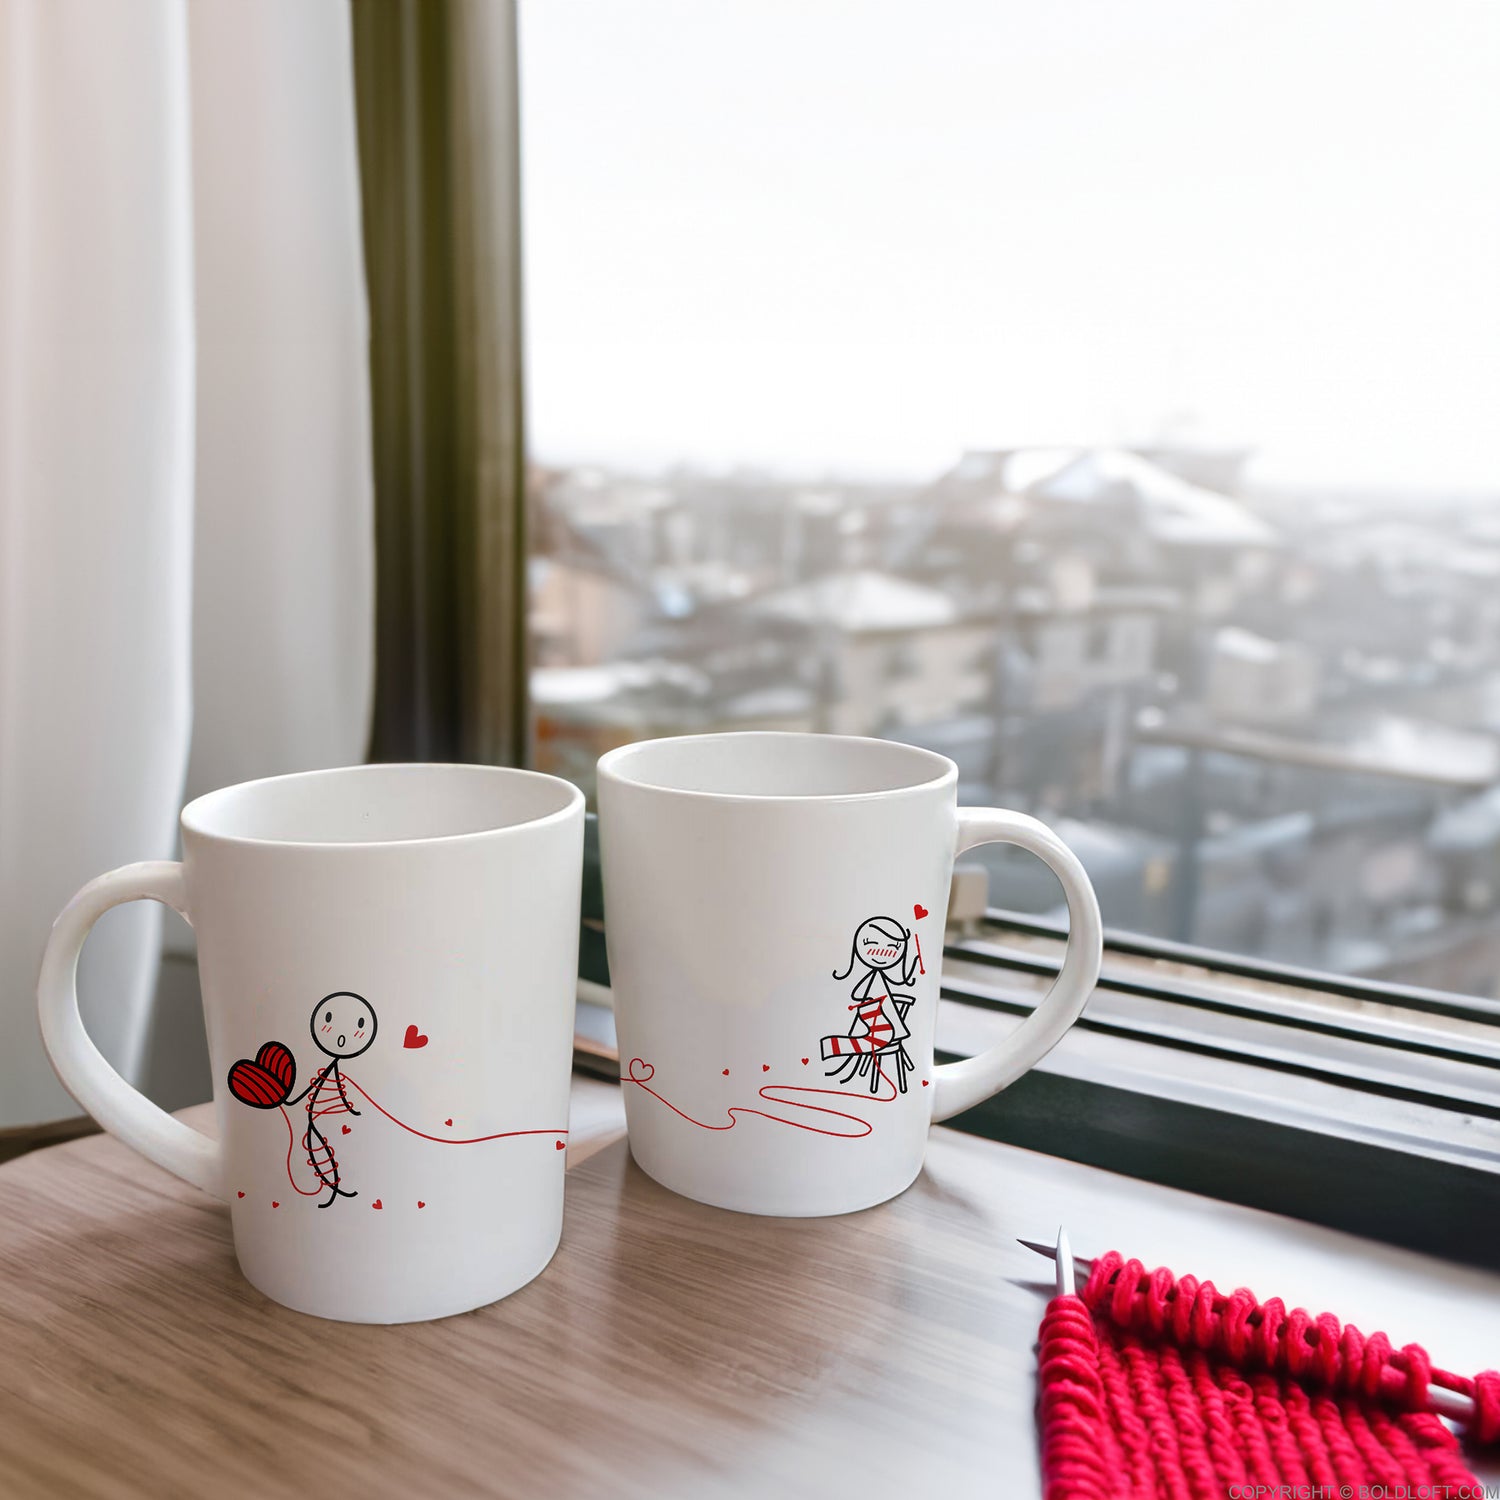 BoldLoft Love Ties Us Together Couple Mugs, featuring a girl knitting her love to a boy